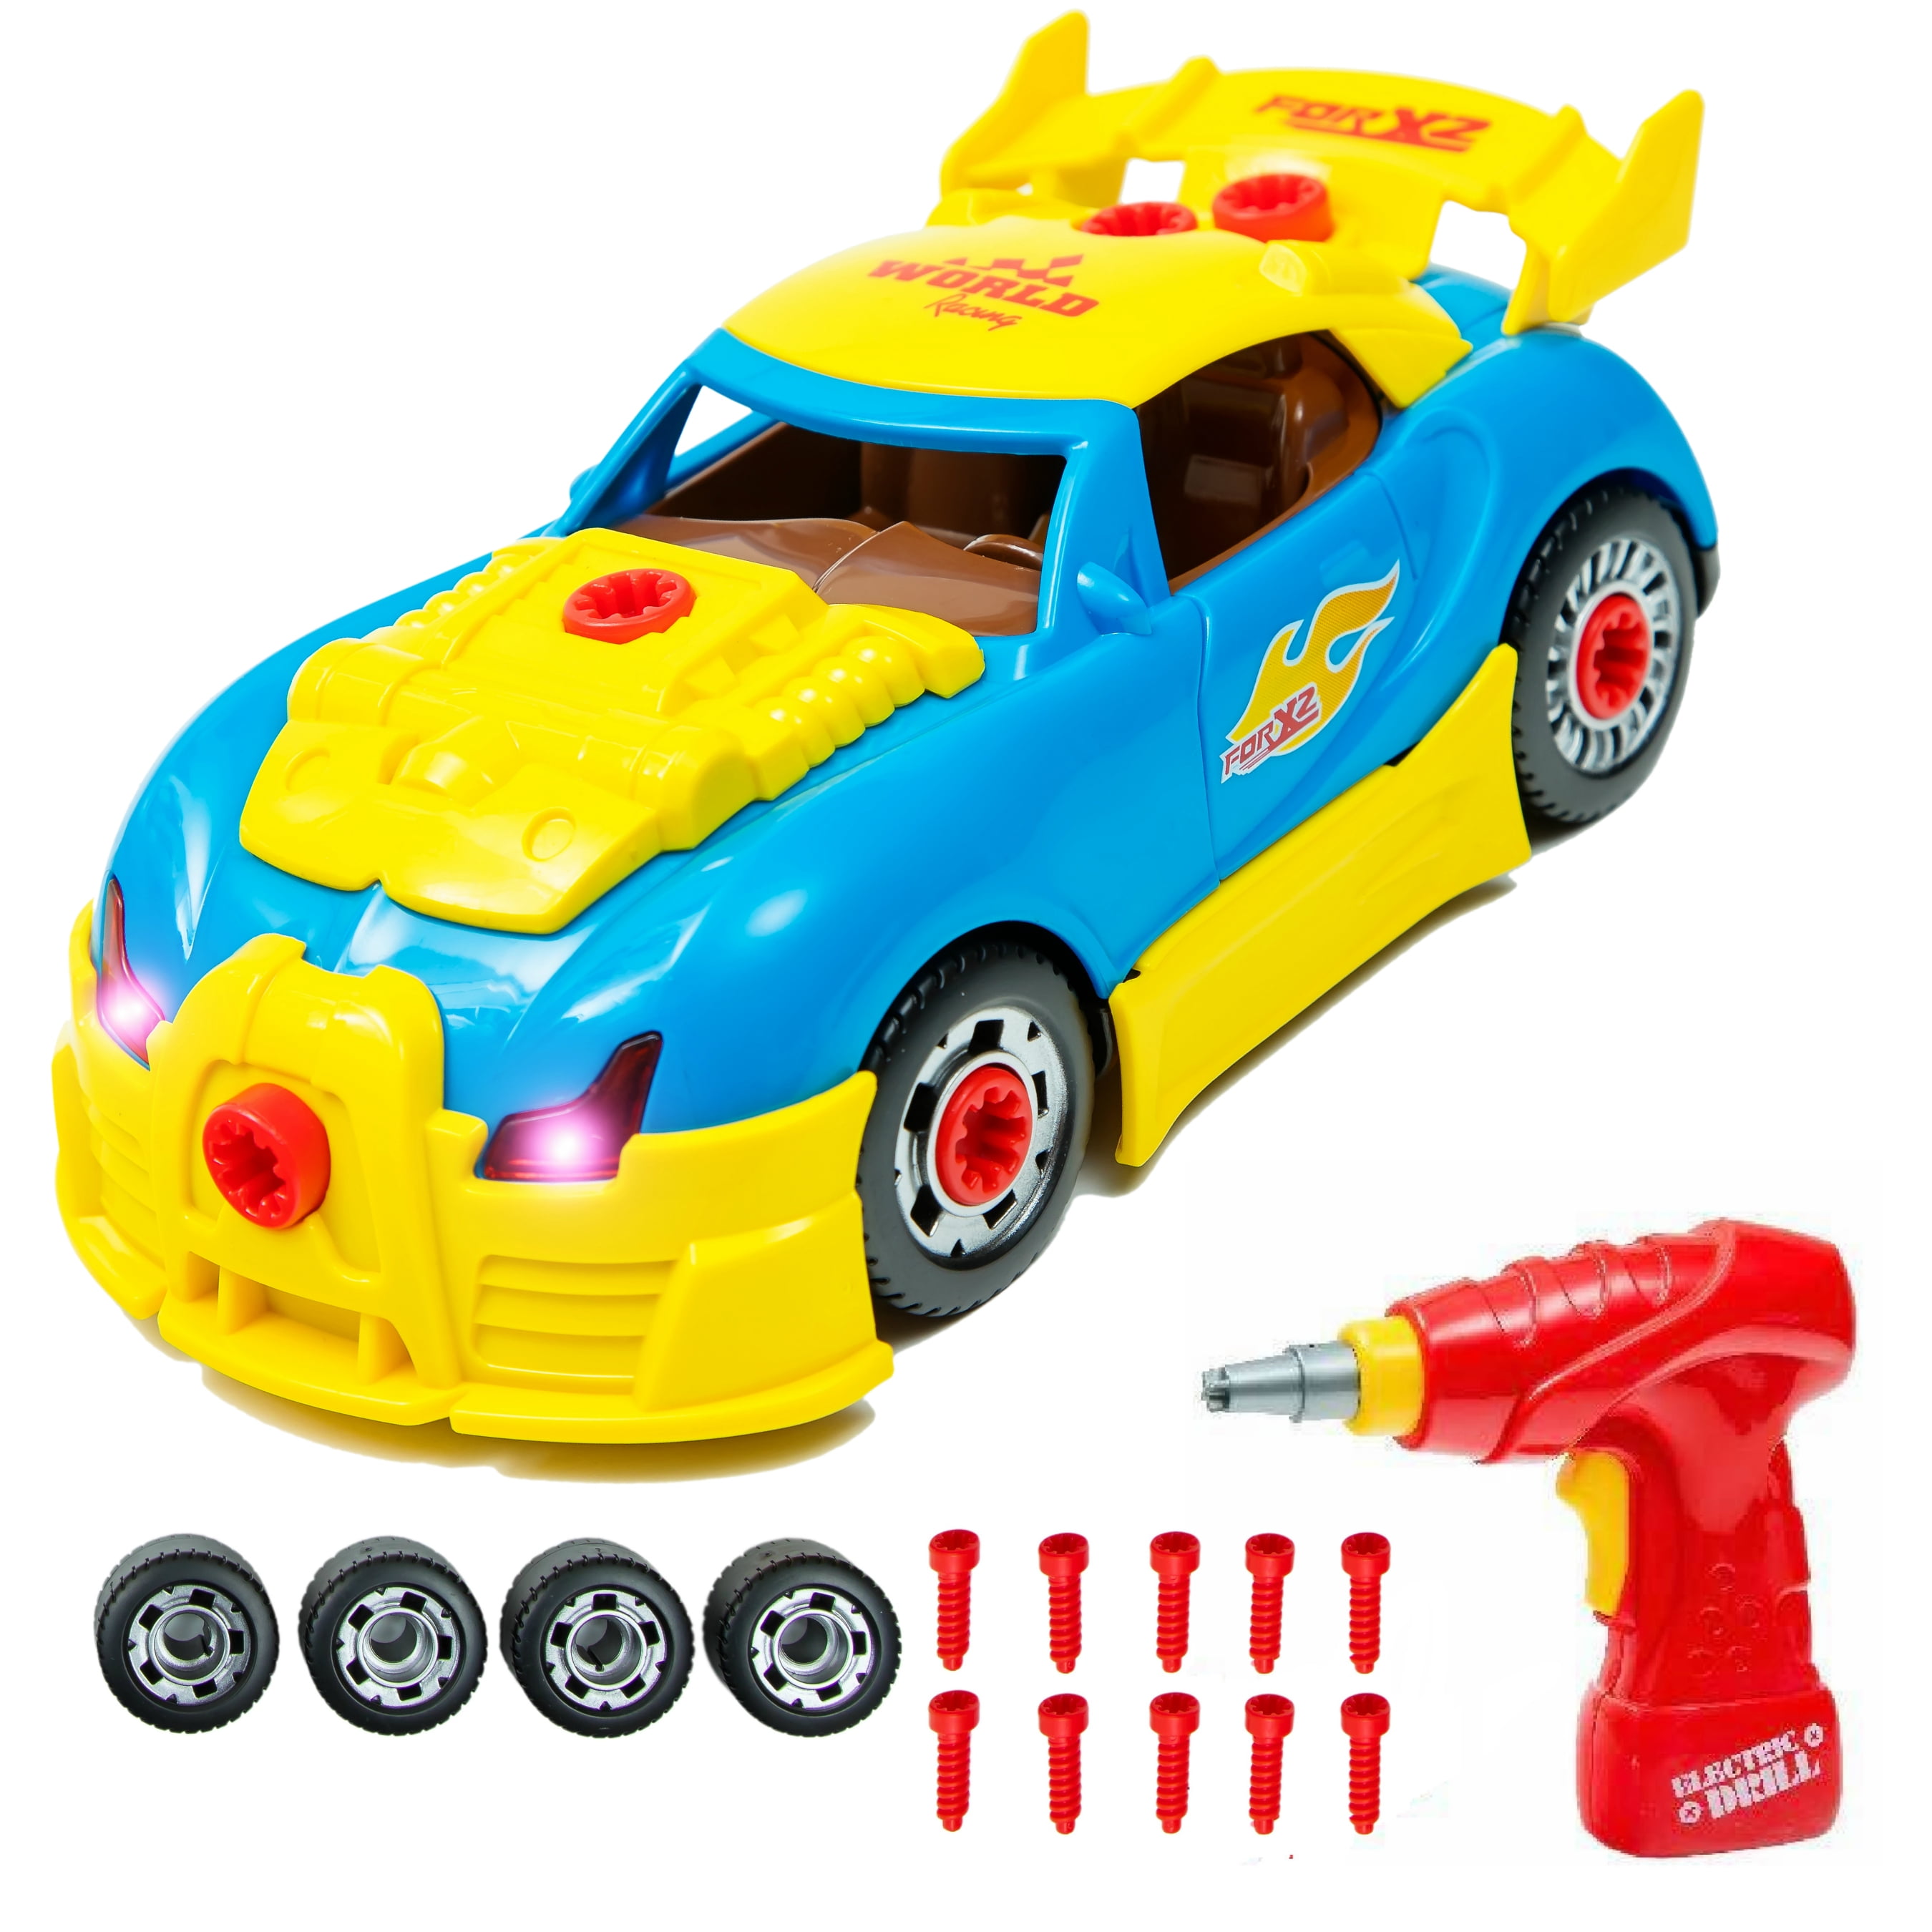 Prextex 4 in 1 Build Your Own Racer Car Set STEM Toy With Real Working Drill And 